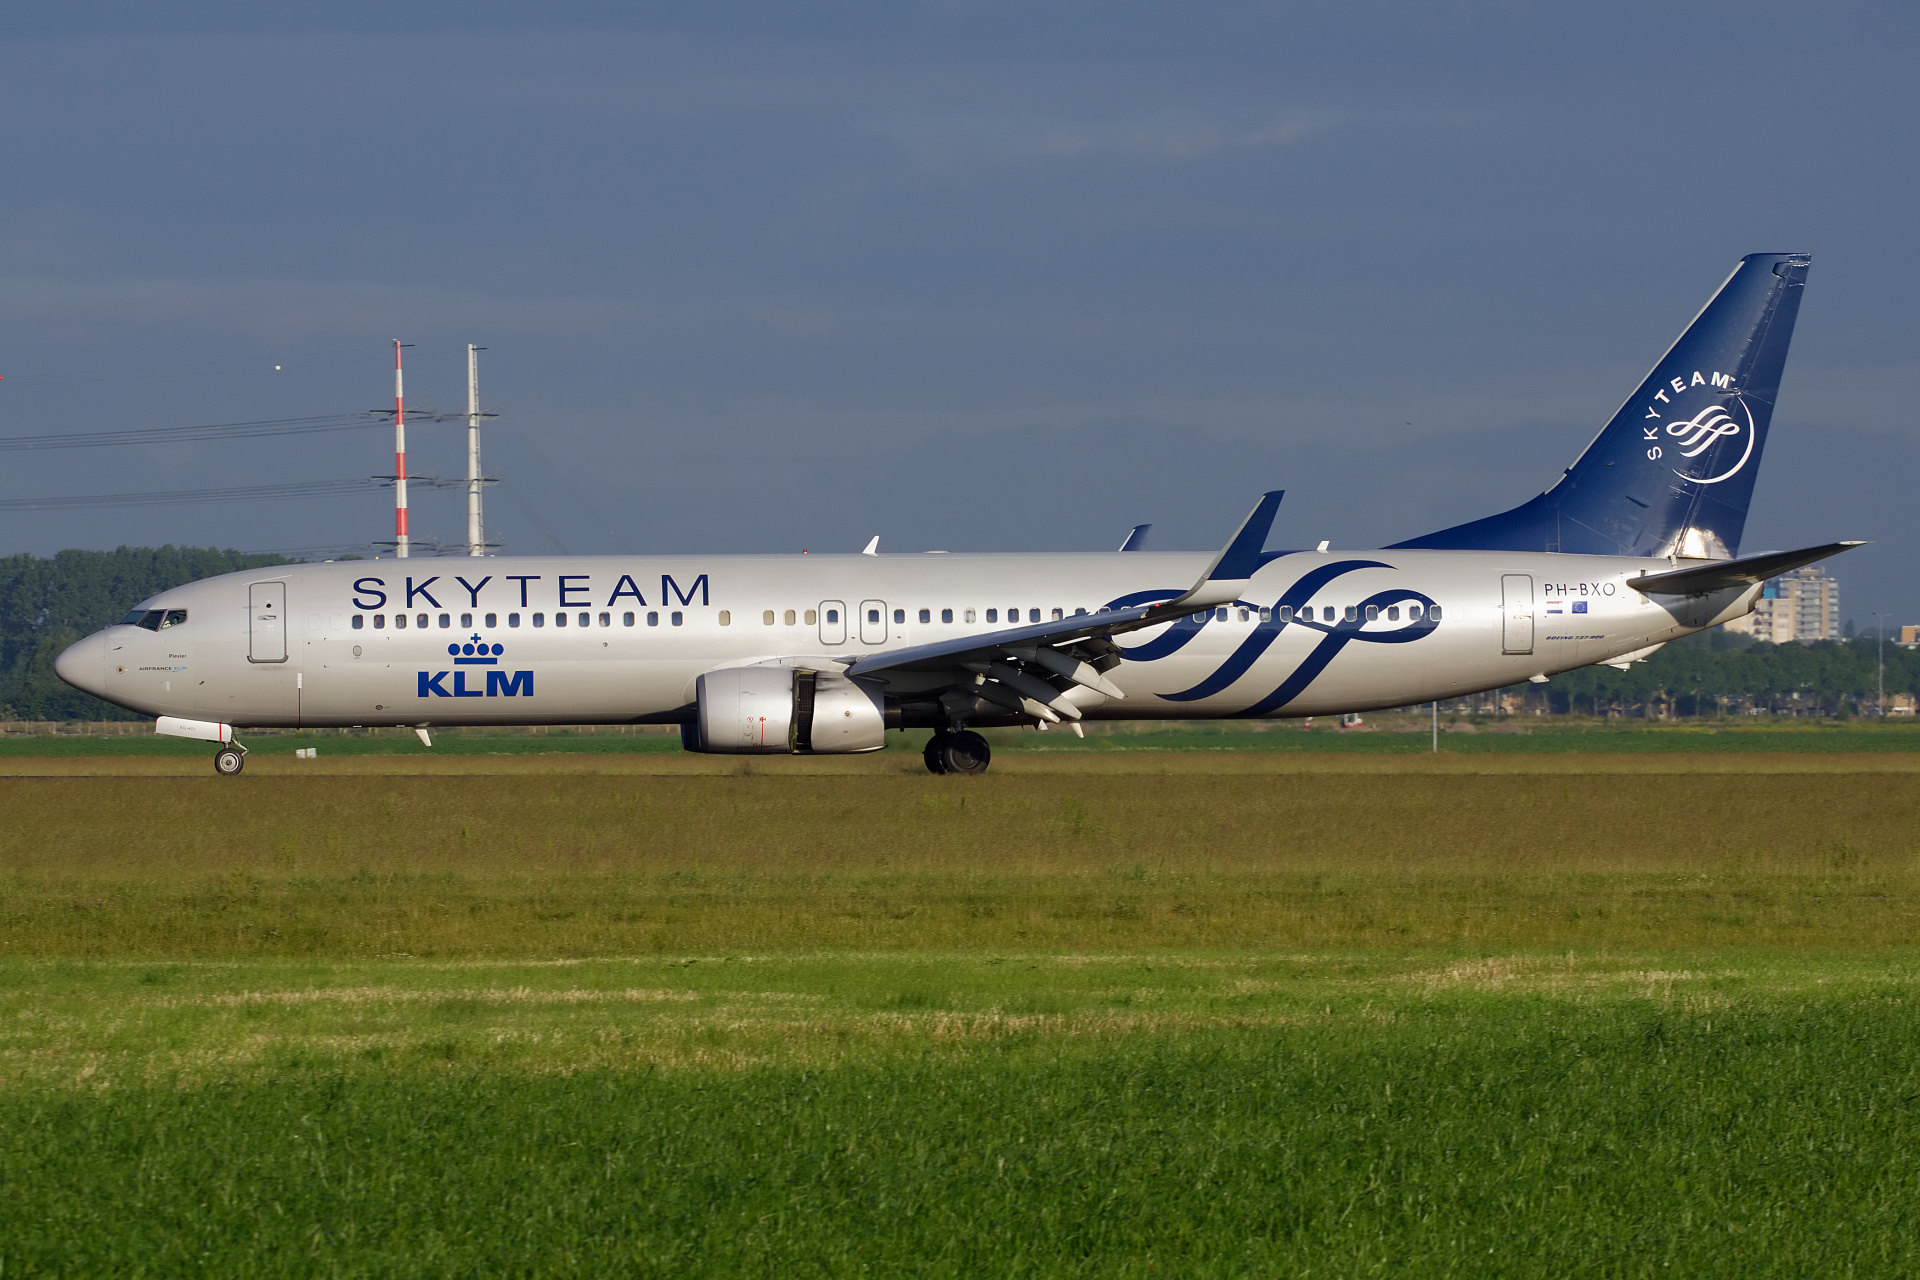 PH-BXO (SkyTeam livery) (Aircraft » Schiphol Spotting » Boeing 737-900 » KLM Royal Dutch Airlines)